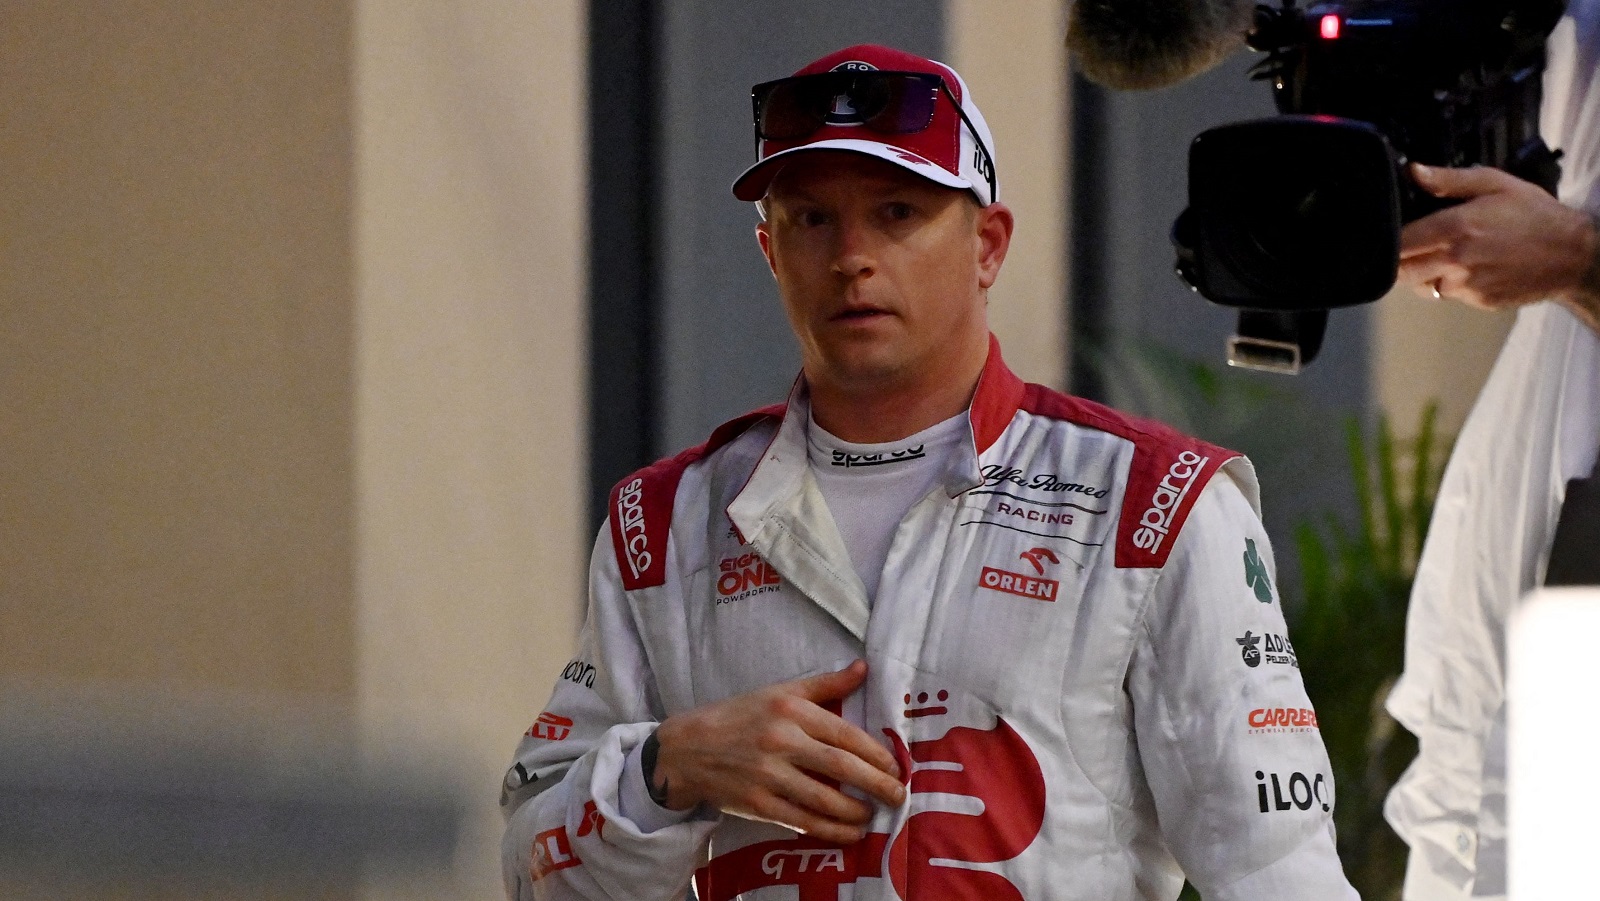 Finnish driver Kimi Raikkonen walks back in his team's hospitality area after he retired from the race at the Yas Marina Circuit during the Abu Dhabi Formula 1 Grand Prix on Dec. 12, 2021. | Andrej Isakovic / AFP via Getty Images